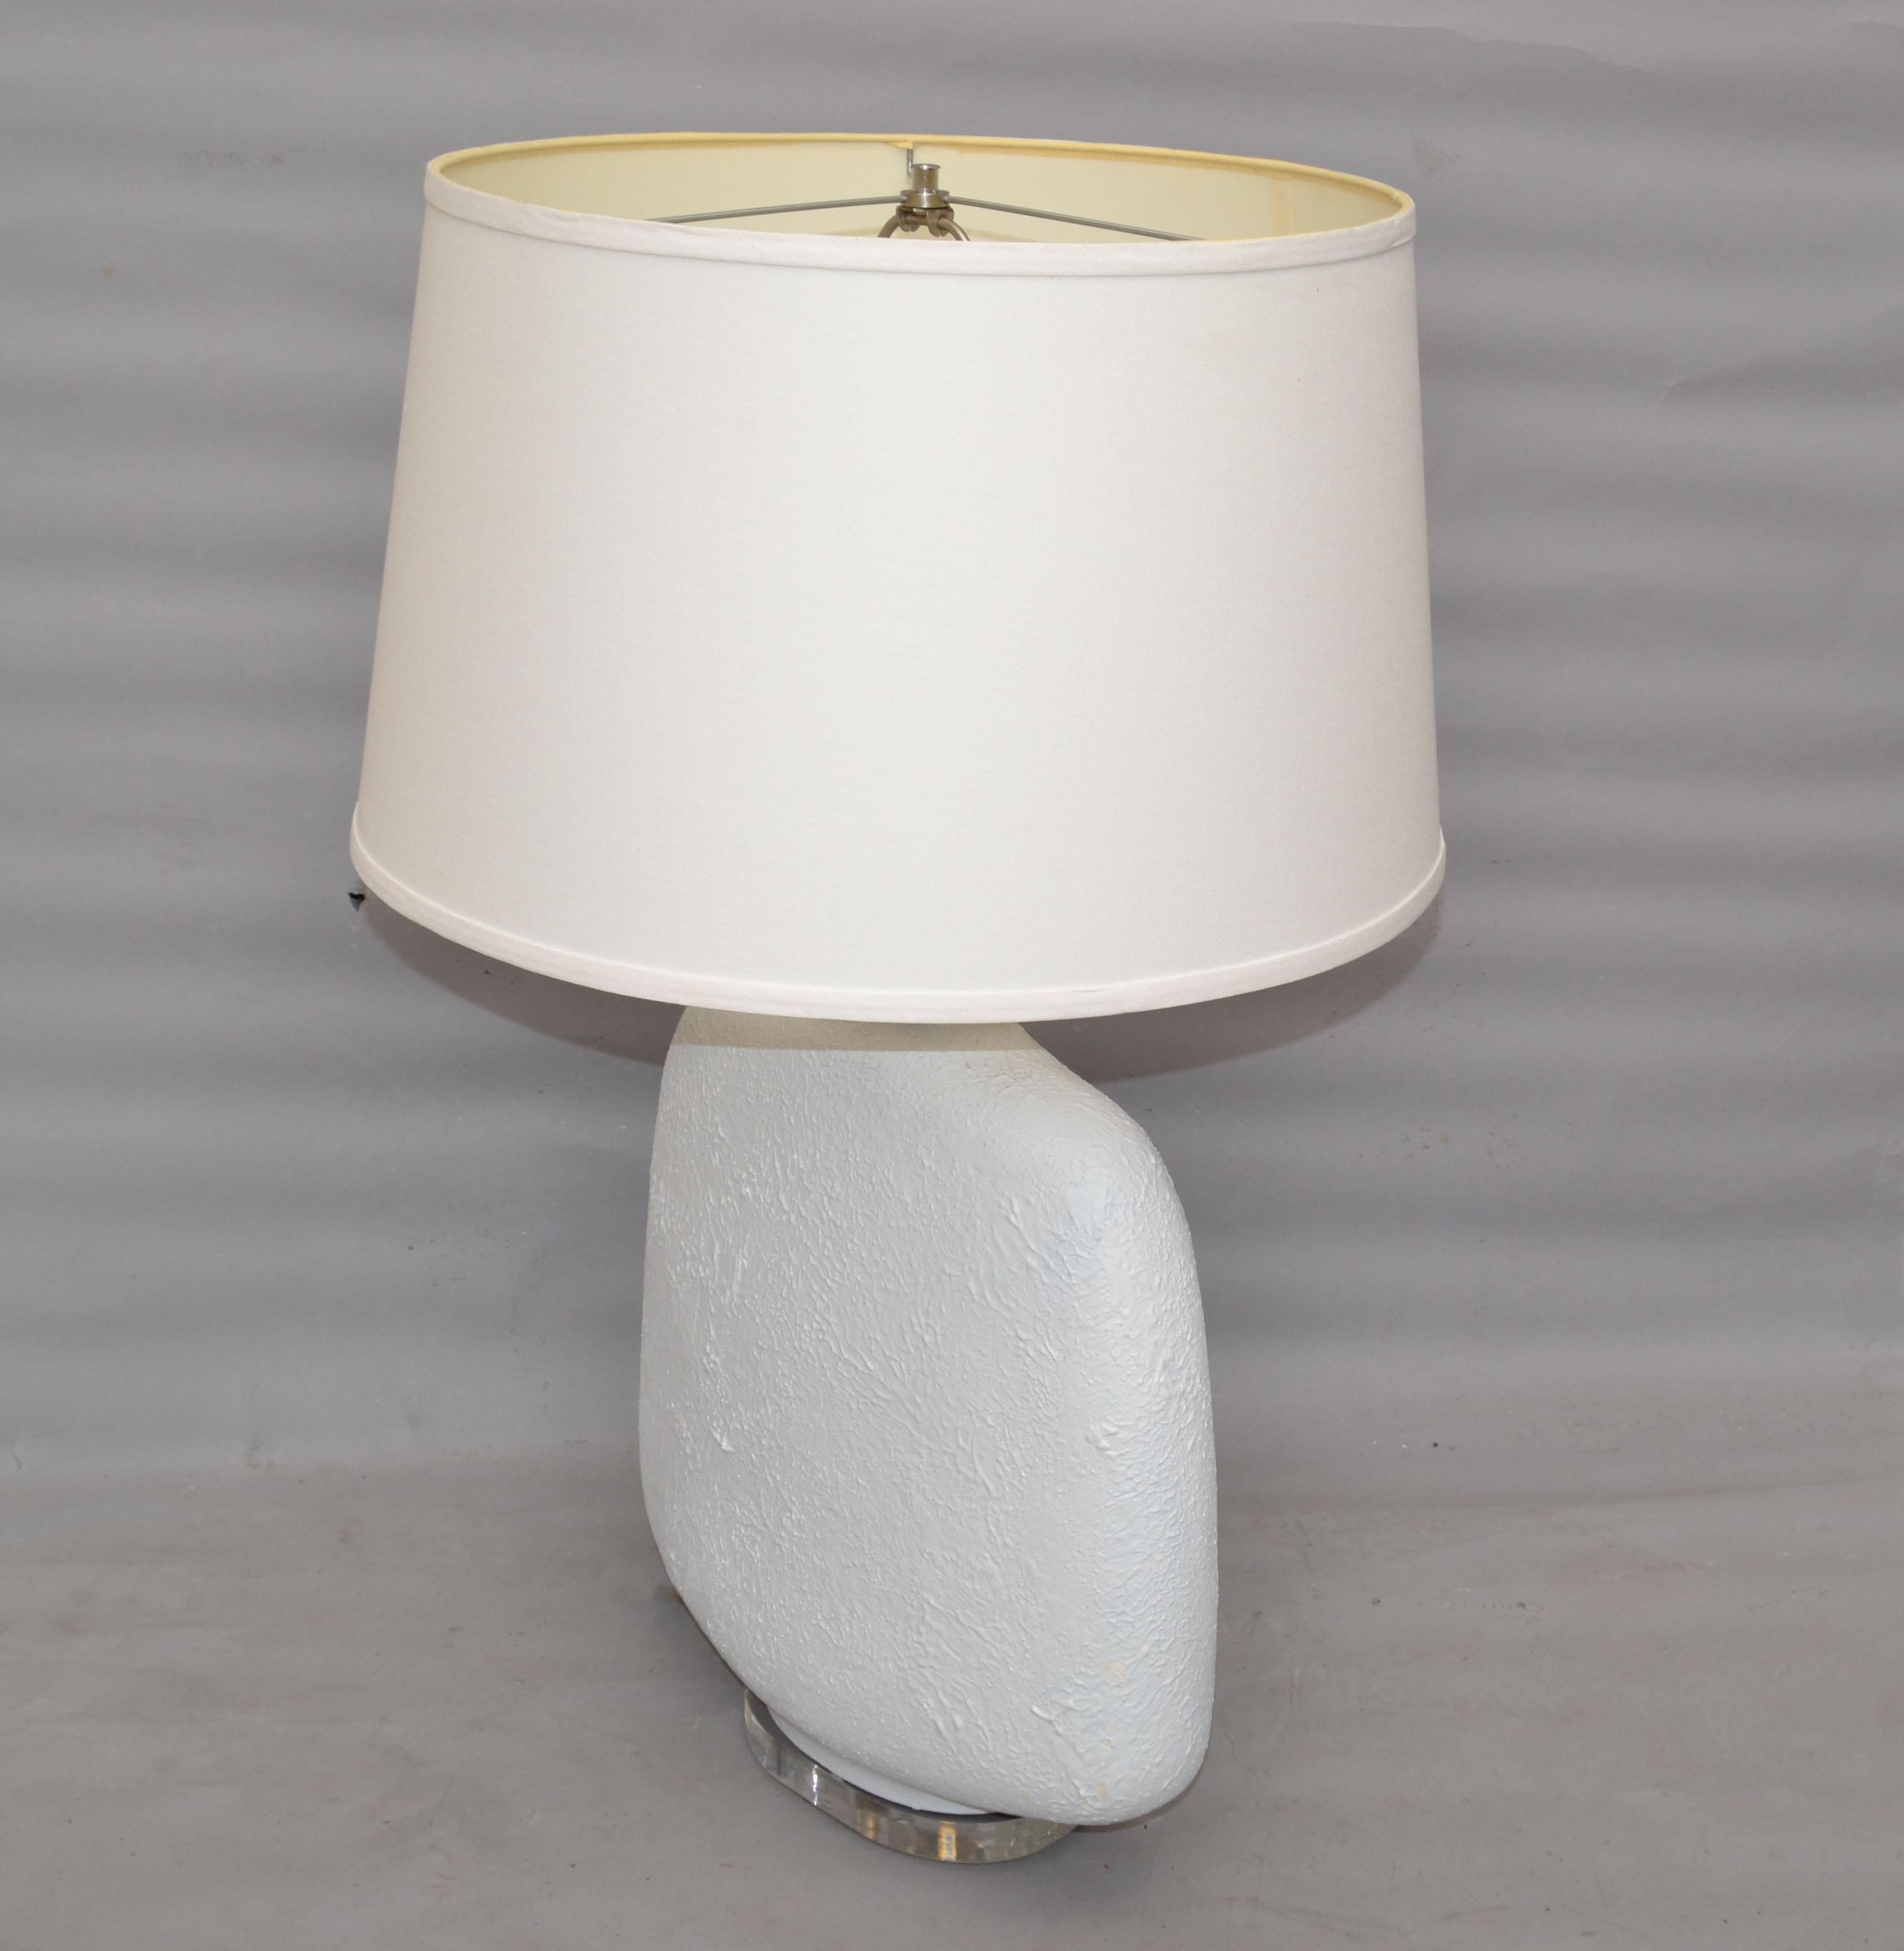 Late 20th Century Mid-Century Modern Iconic Sculptural Textured White Plaster Table Lamp on Lucite For Sale